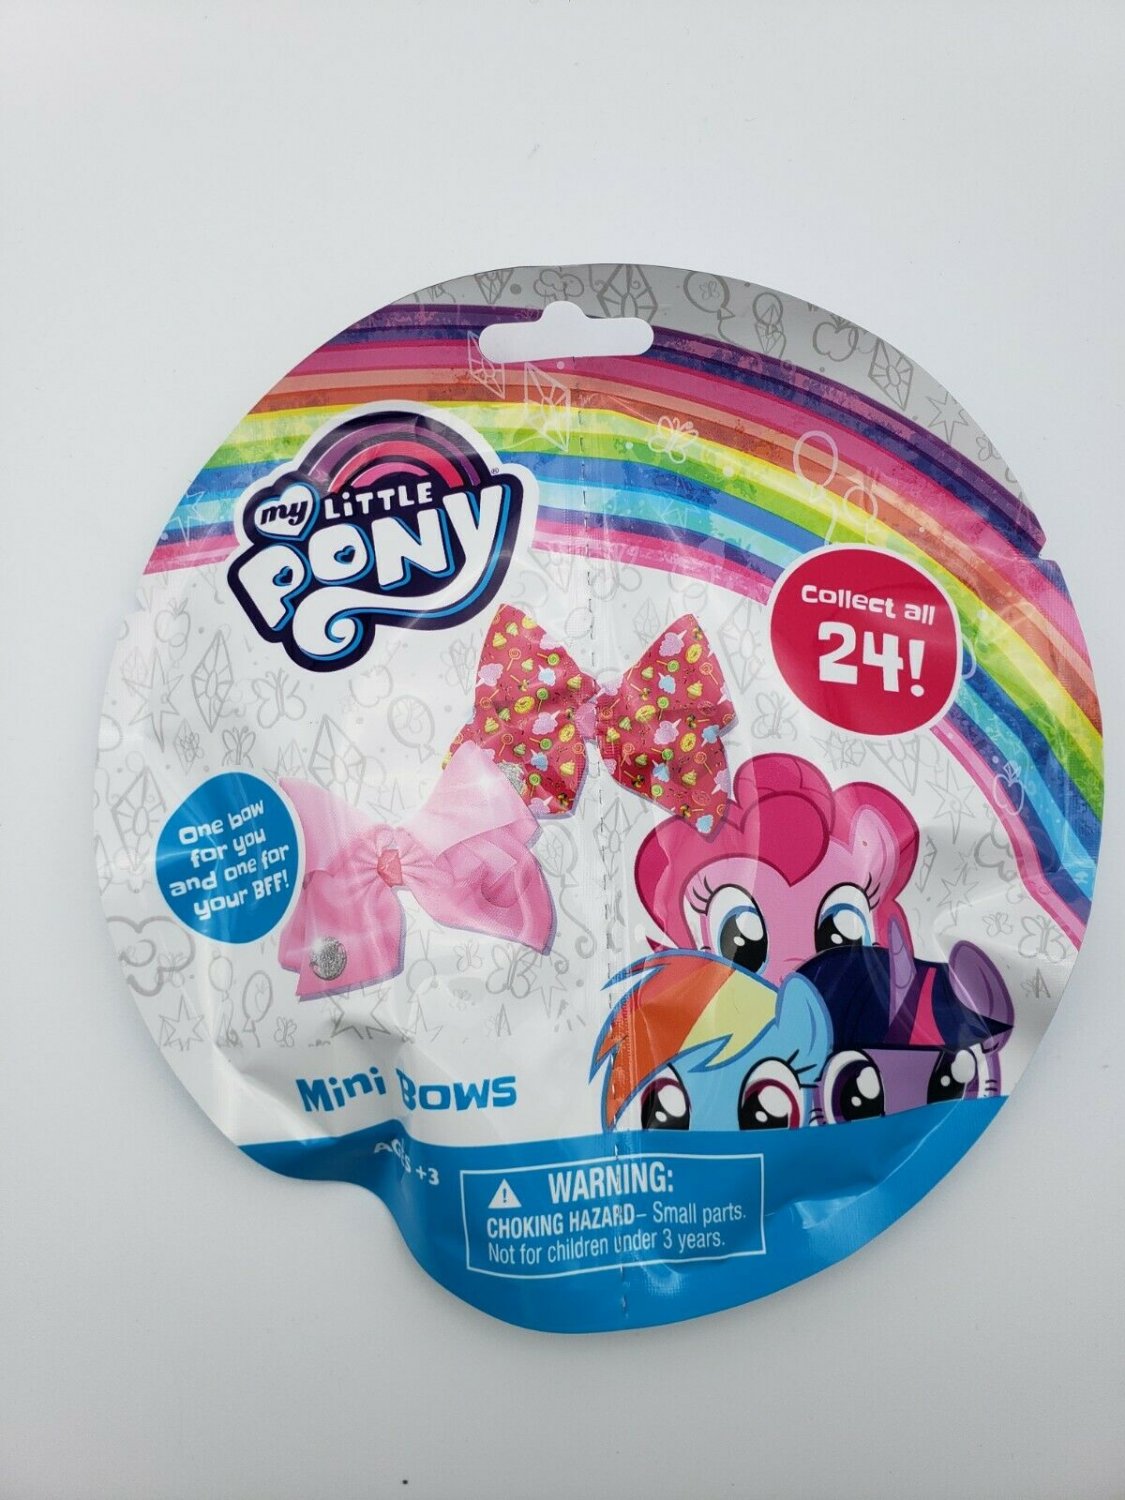 My Little Pony Mini Bows Blind Bag Contains 2 Bows Hasbro MLP for sale online